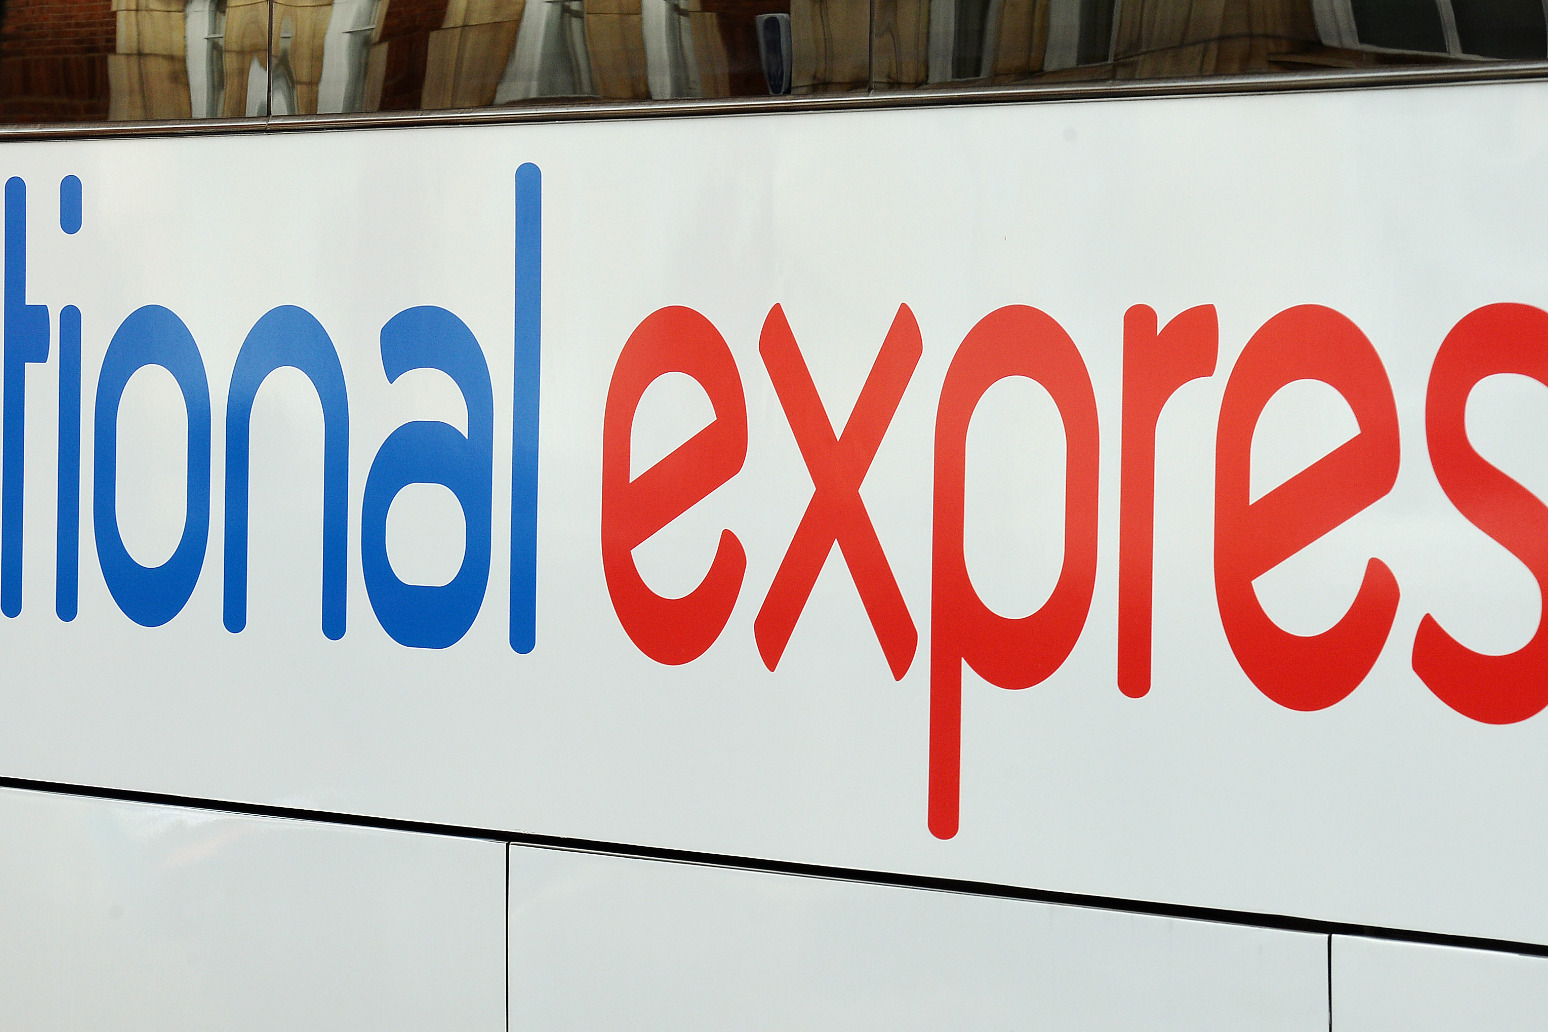 Competition watchdog intervenes in National Express and Stagecoach tie-up 